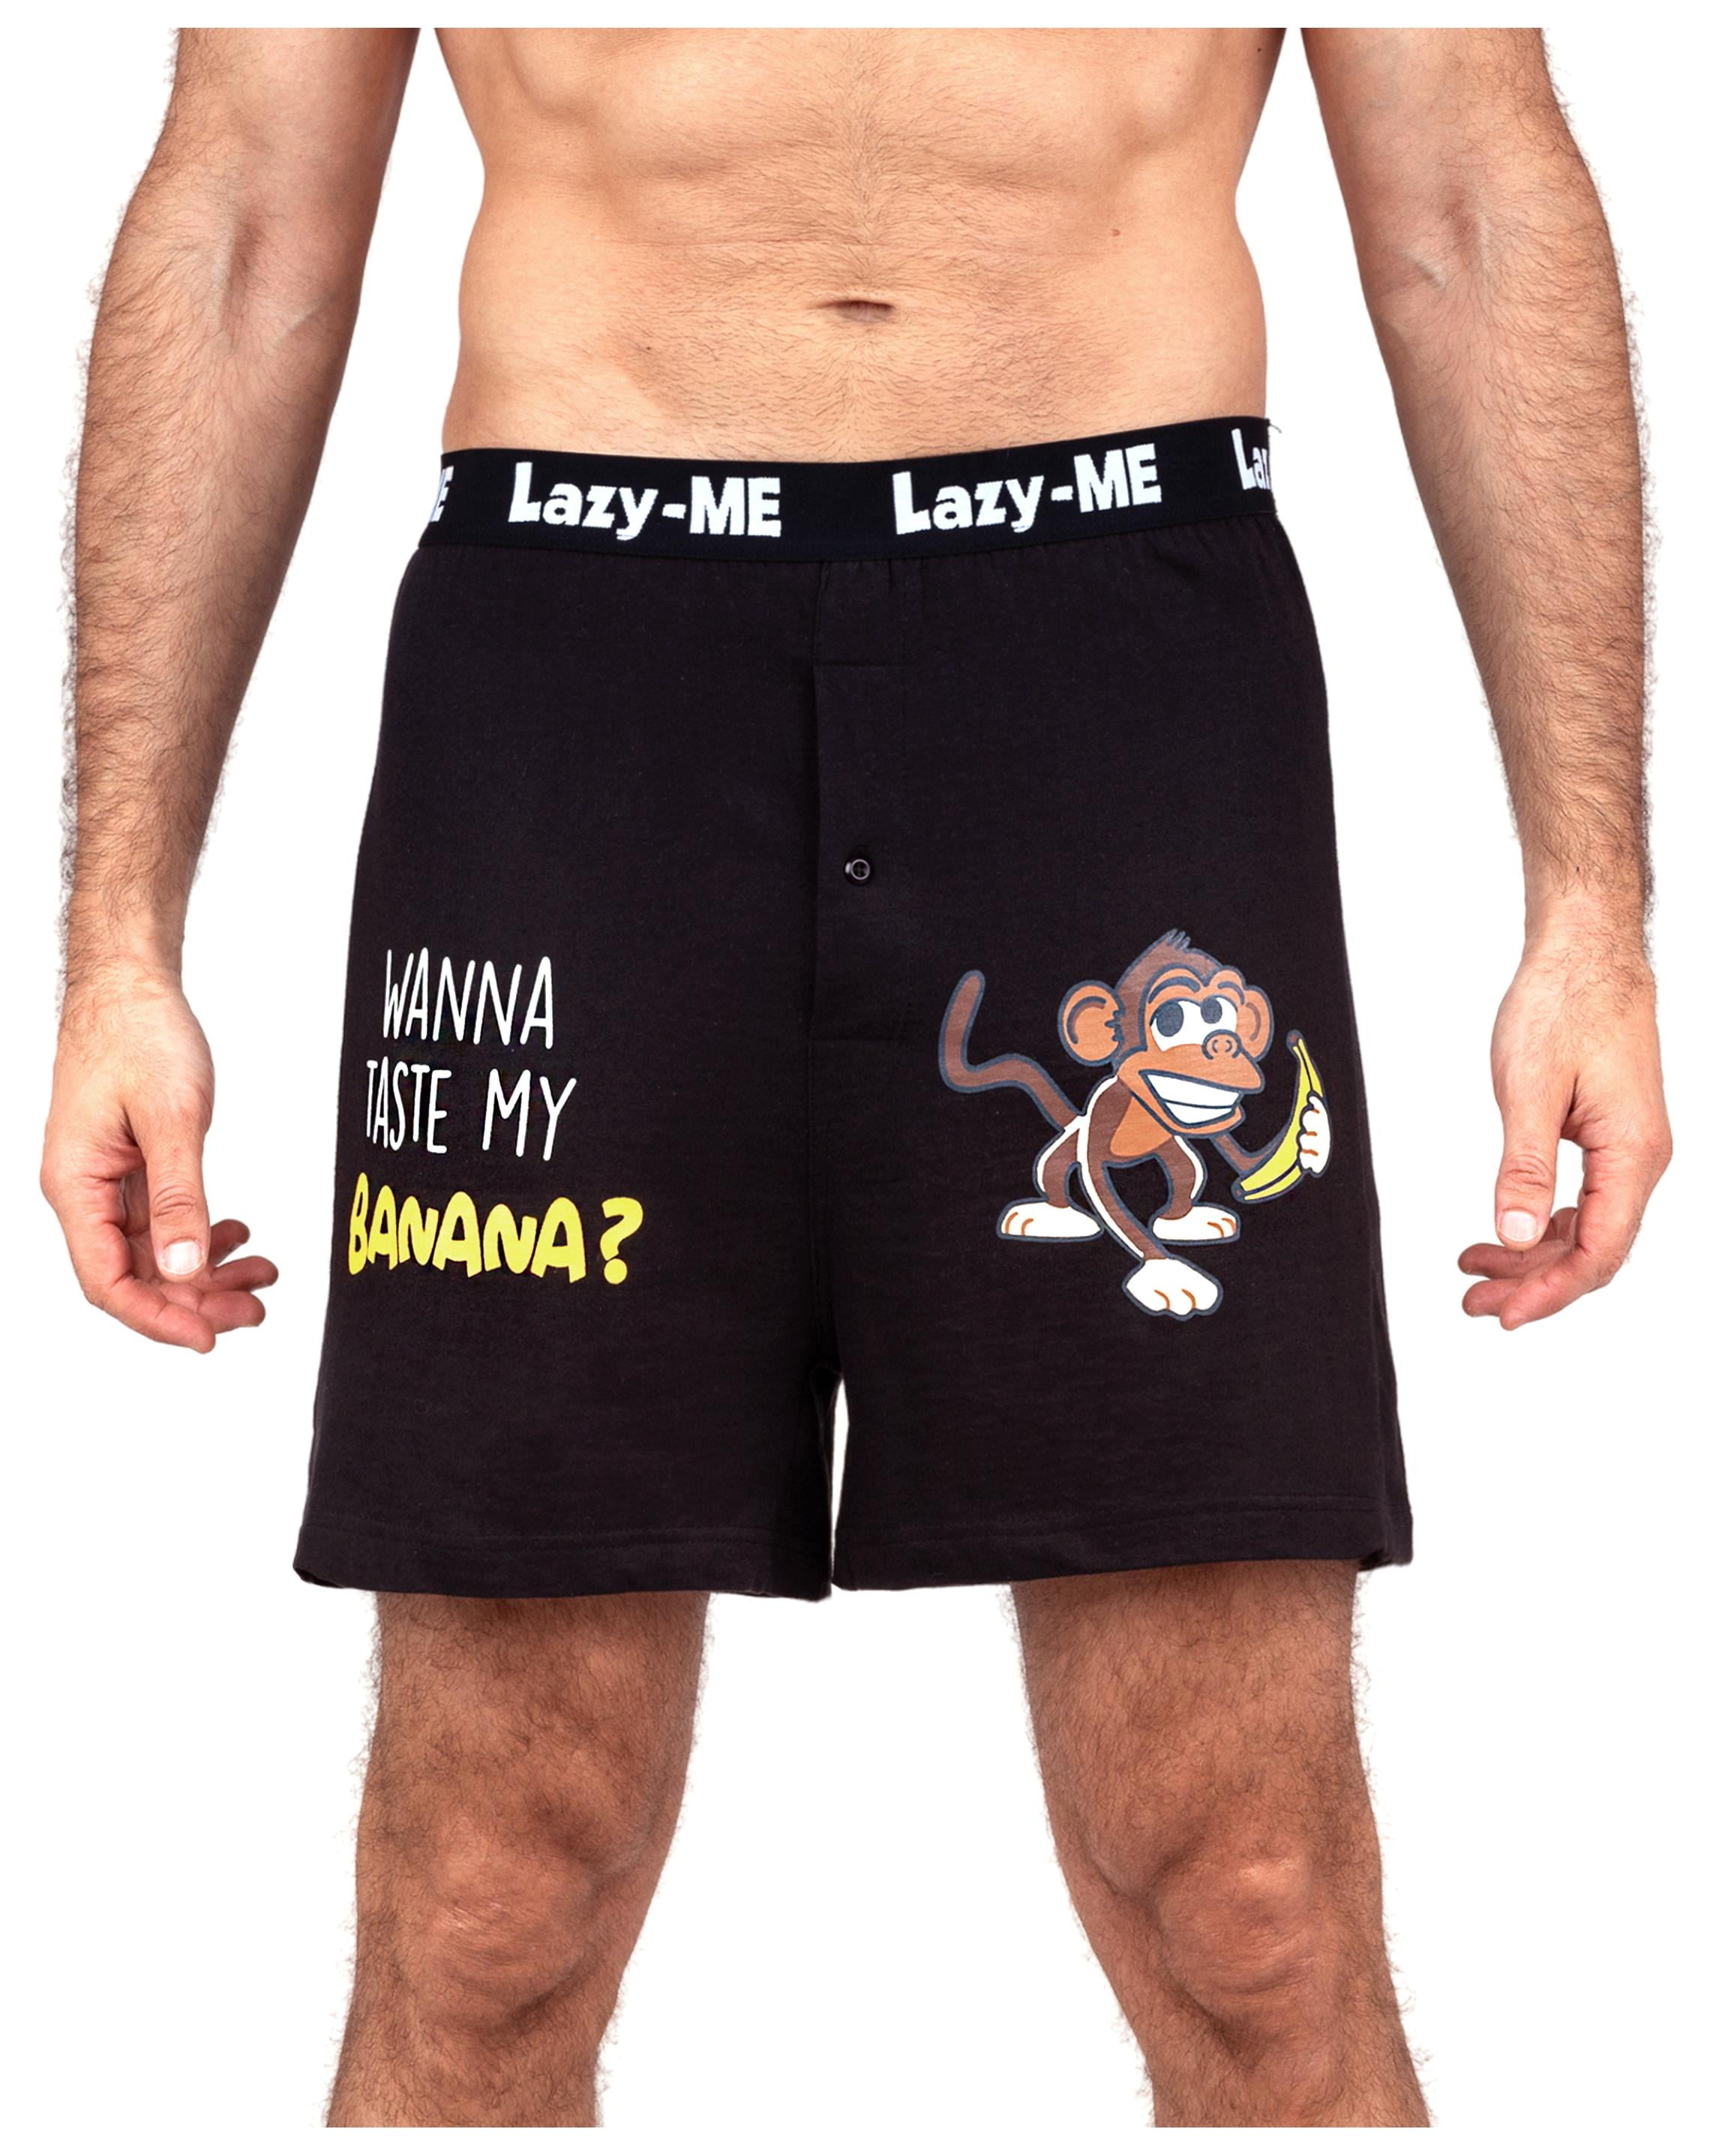 Gag Gifts for Him Lazy Me Men's Funny Novelty Boxer Shorts Humorous Underwear 